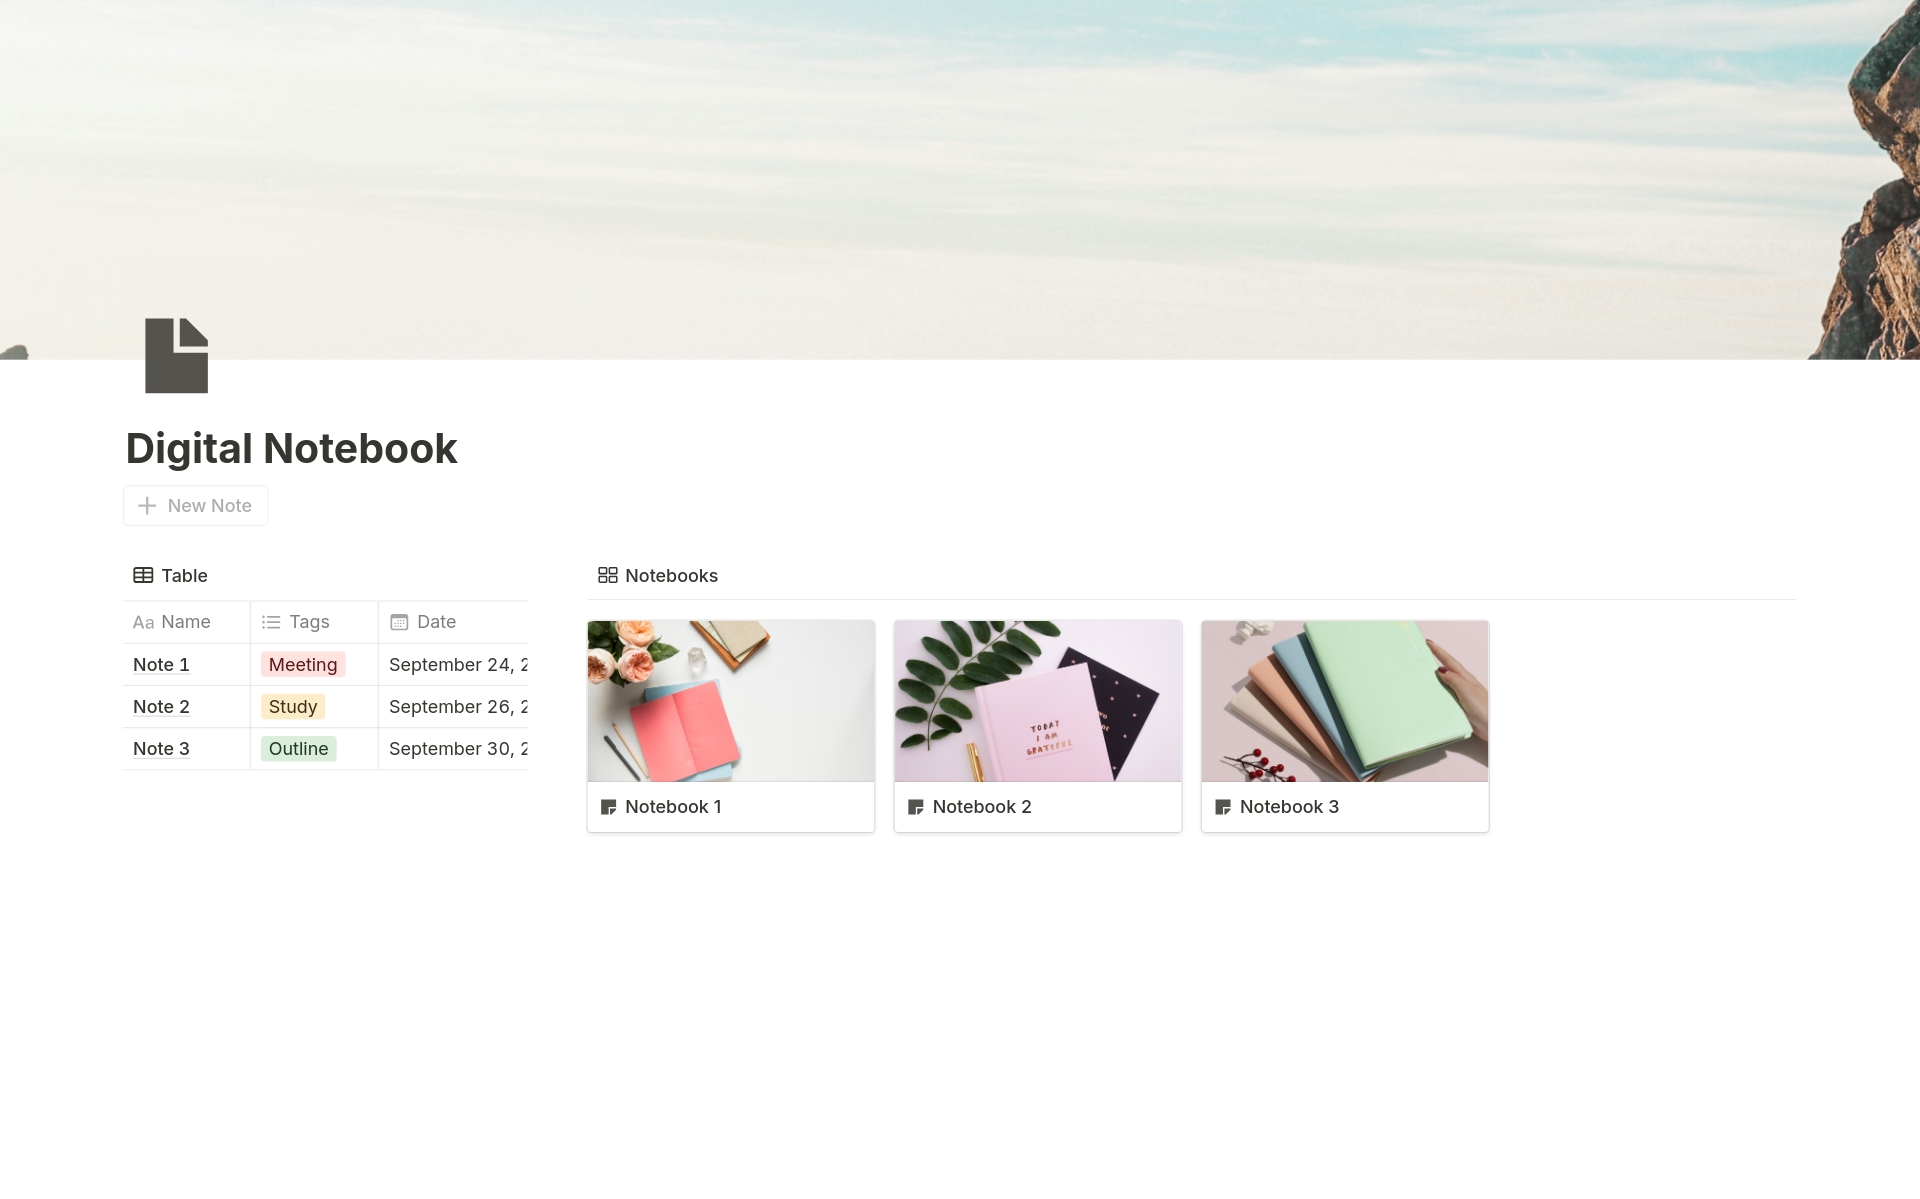 This beginner-friendly Digital Notebook Template can help you get started. With customizable sections and a clean interface, categorizing your notes and ideas into different notebooks becomes simple!